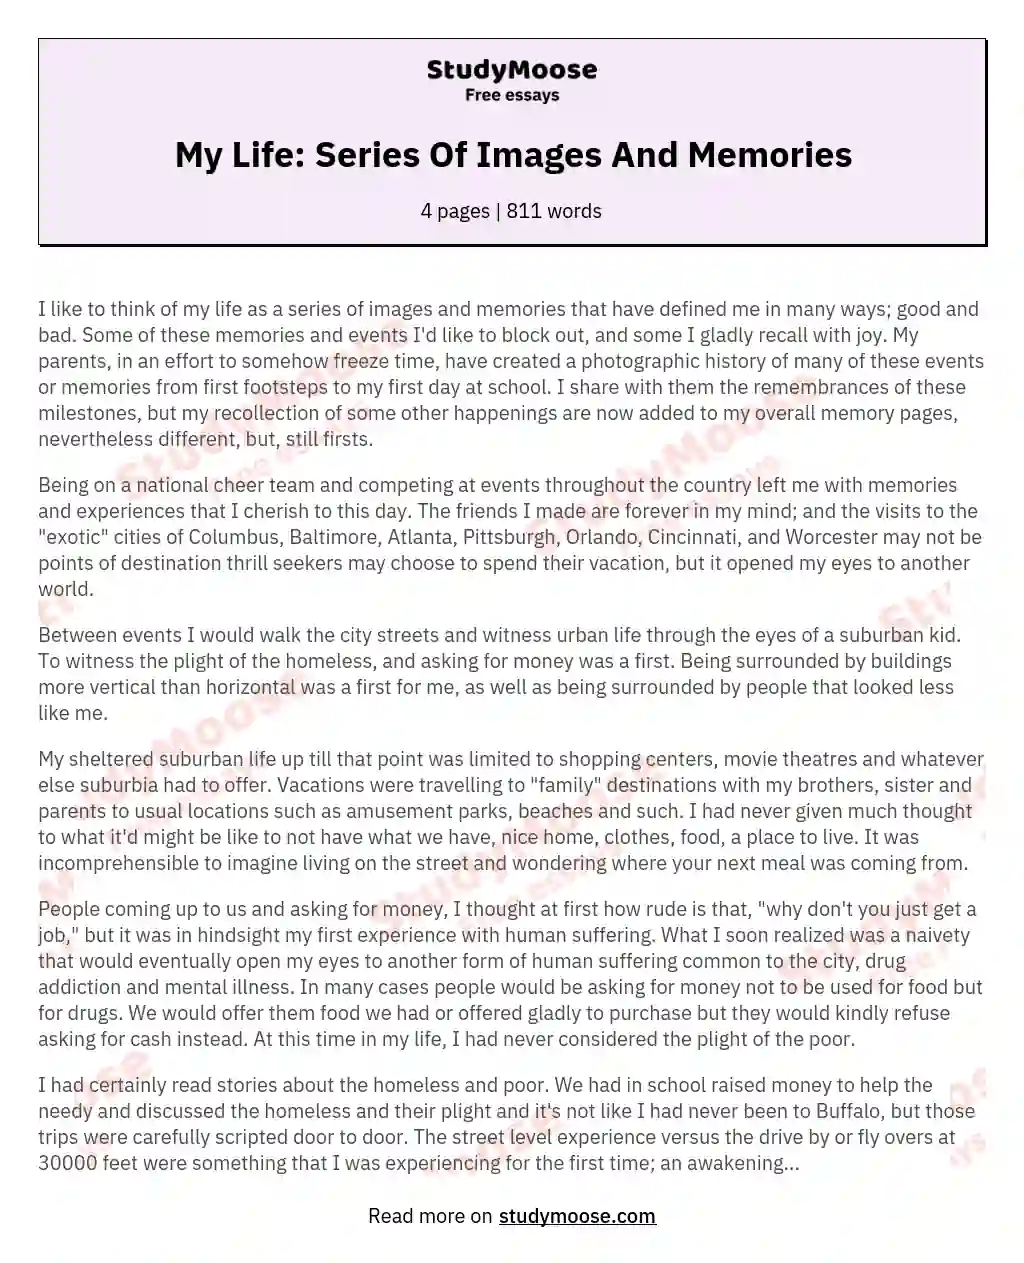 My Life: Series Of Images And Memories essay